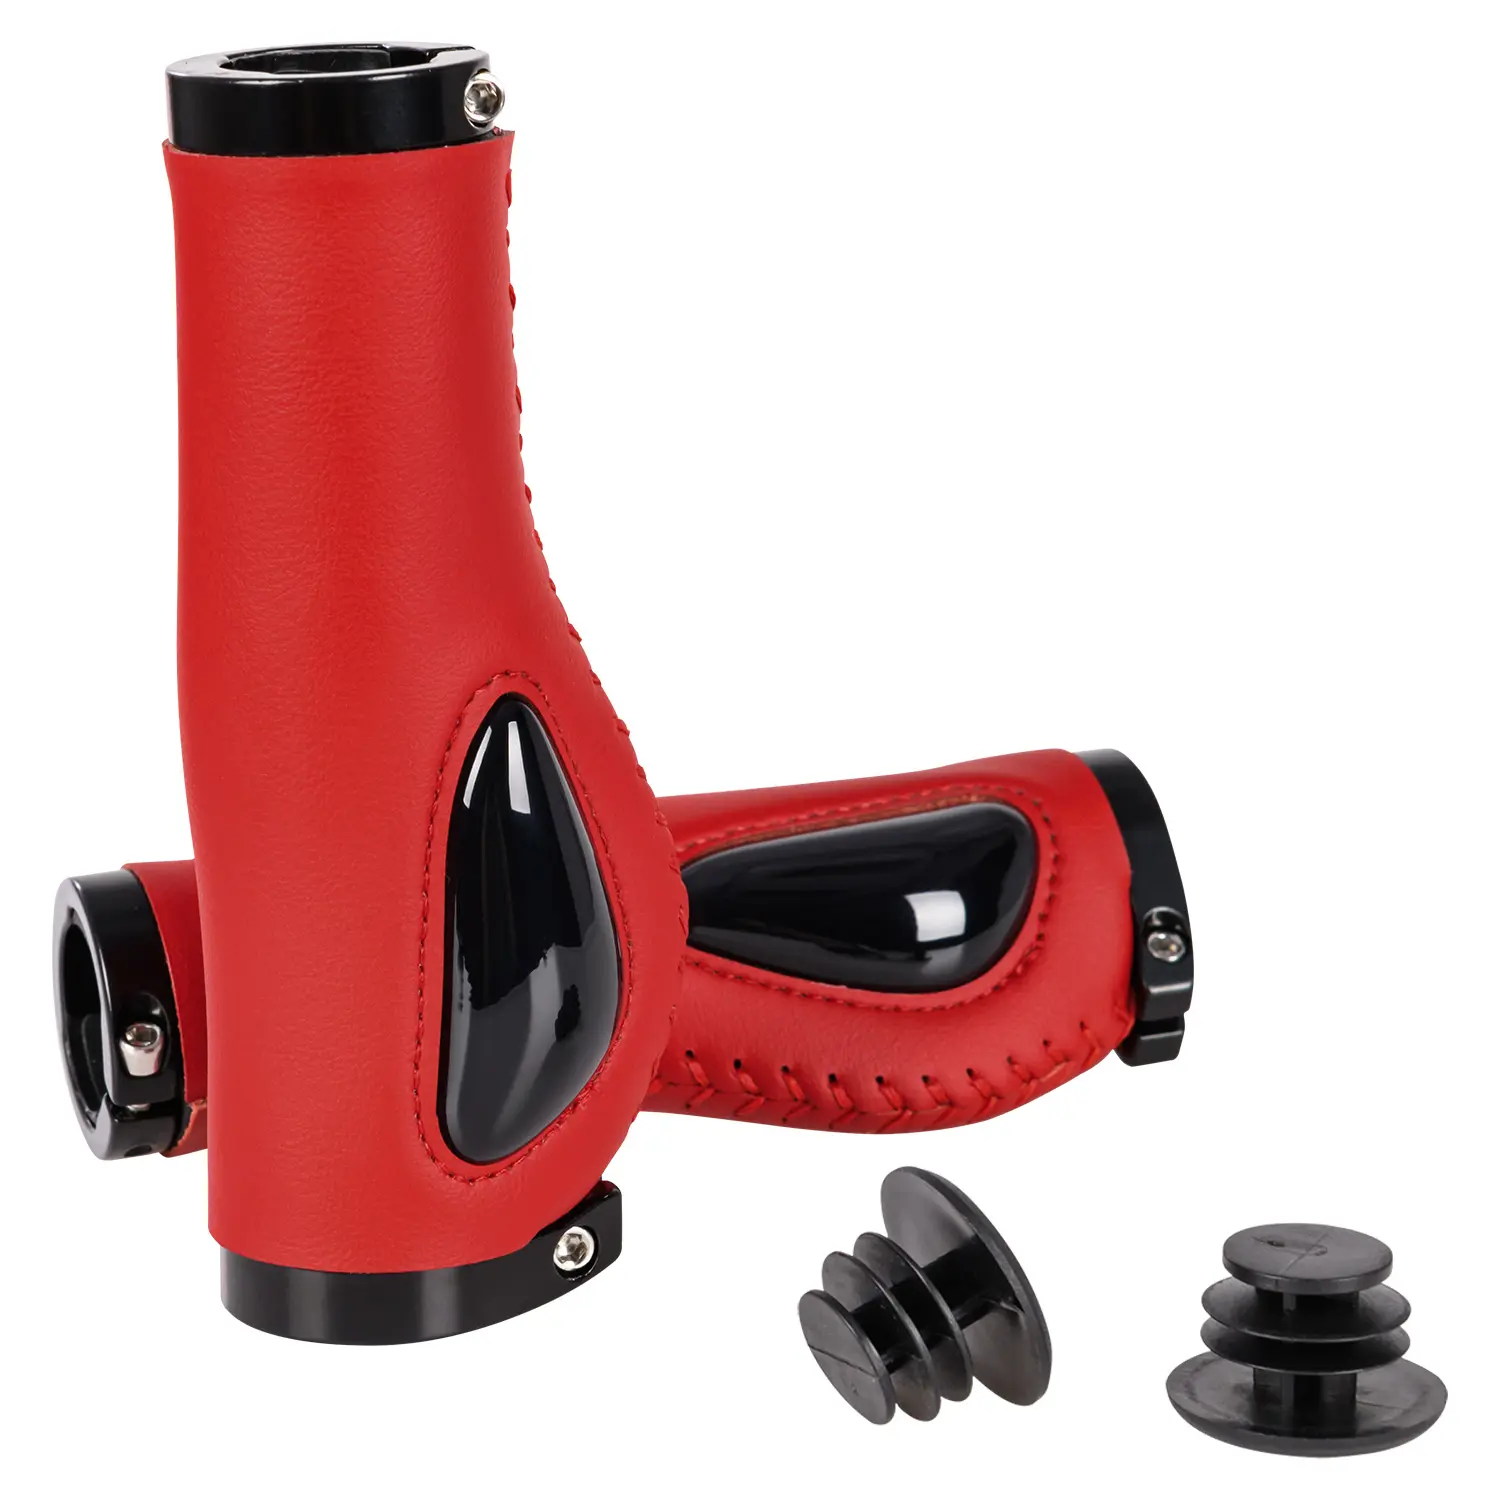 Handlebar Grips for Various Bicycles - Easy Installation, Durable, Non-Slip PVC Rubber, Comfortable for Long Rides